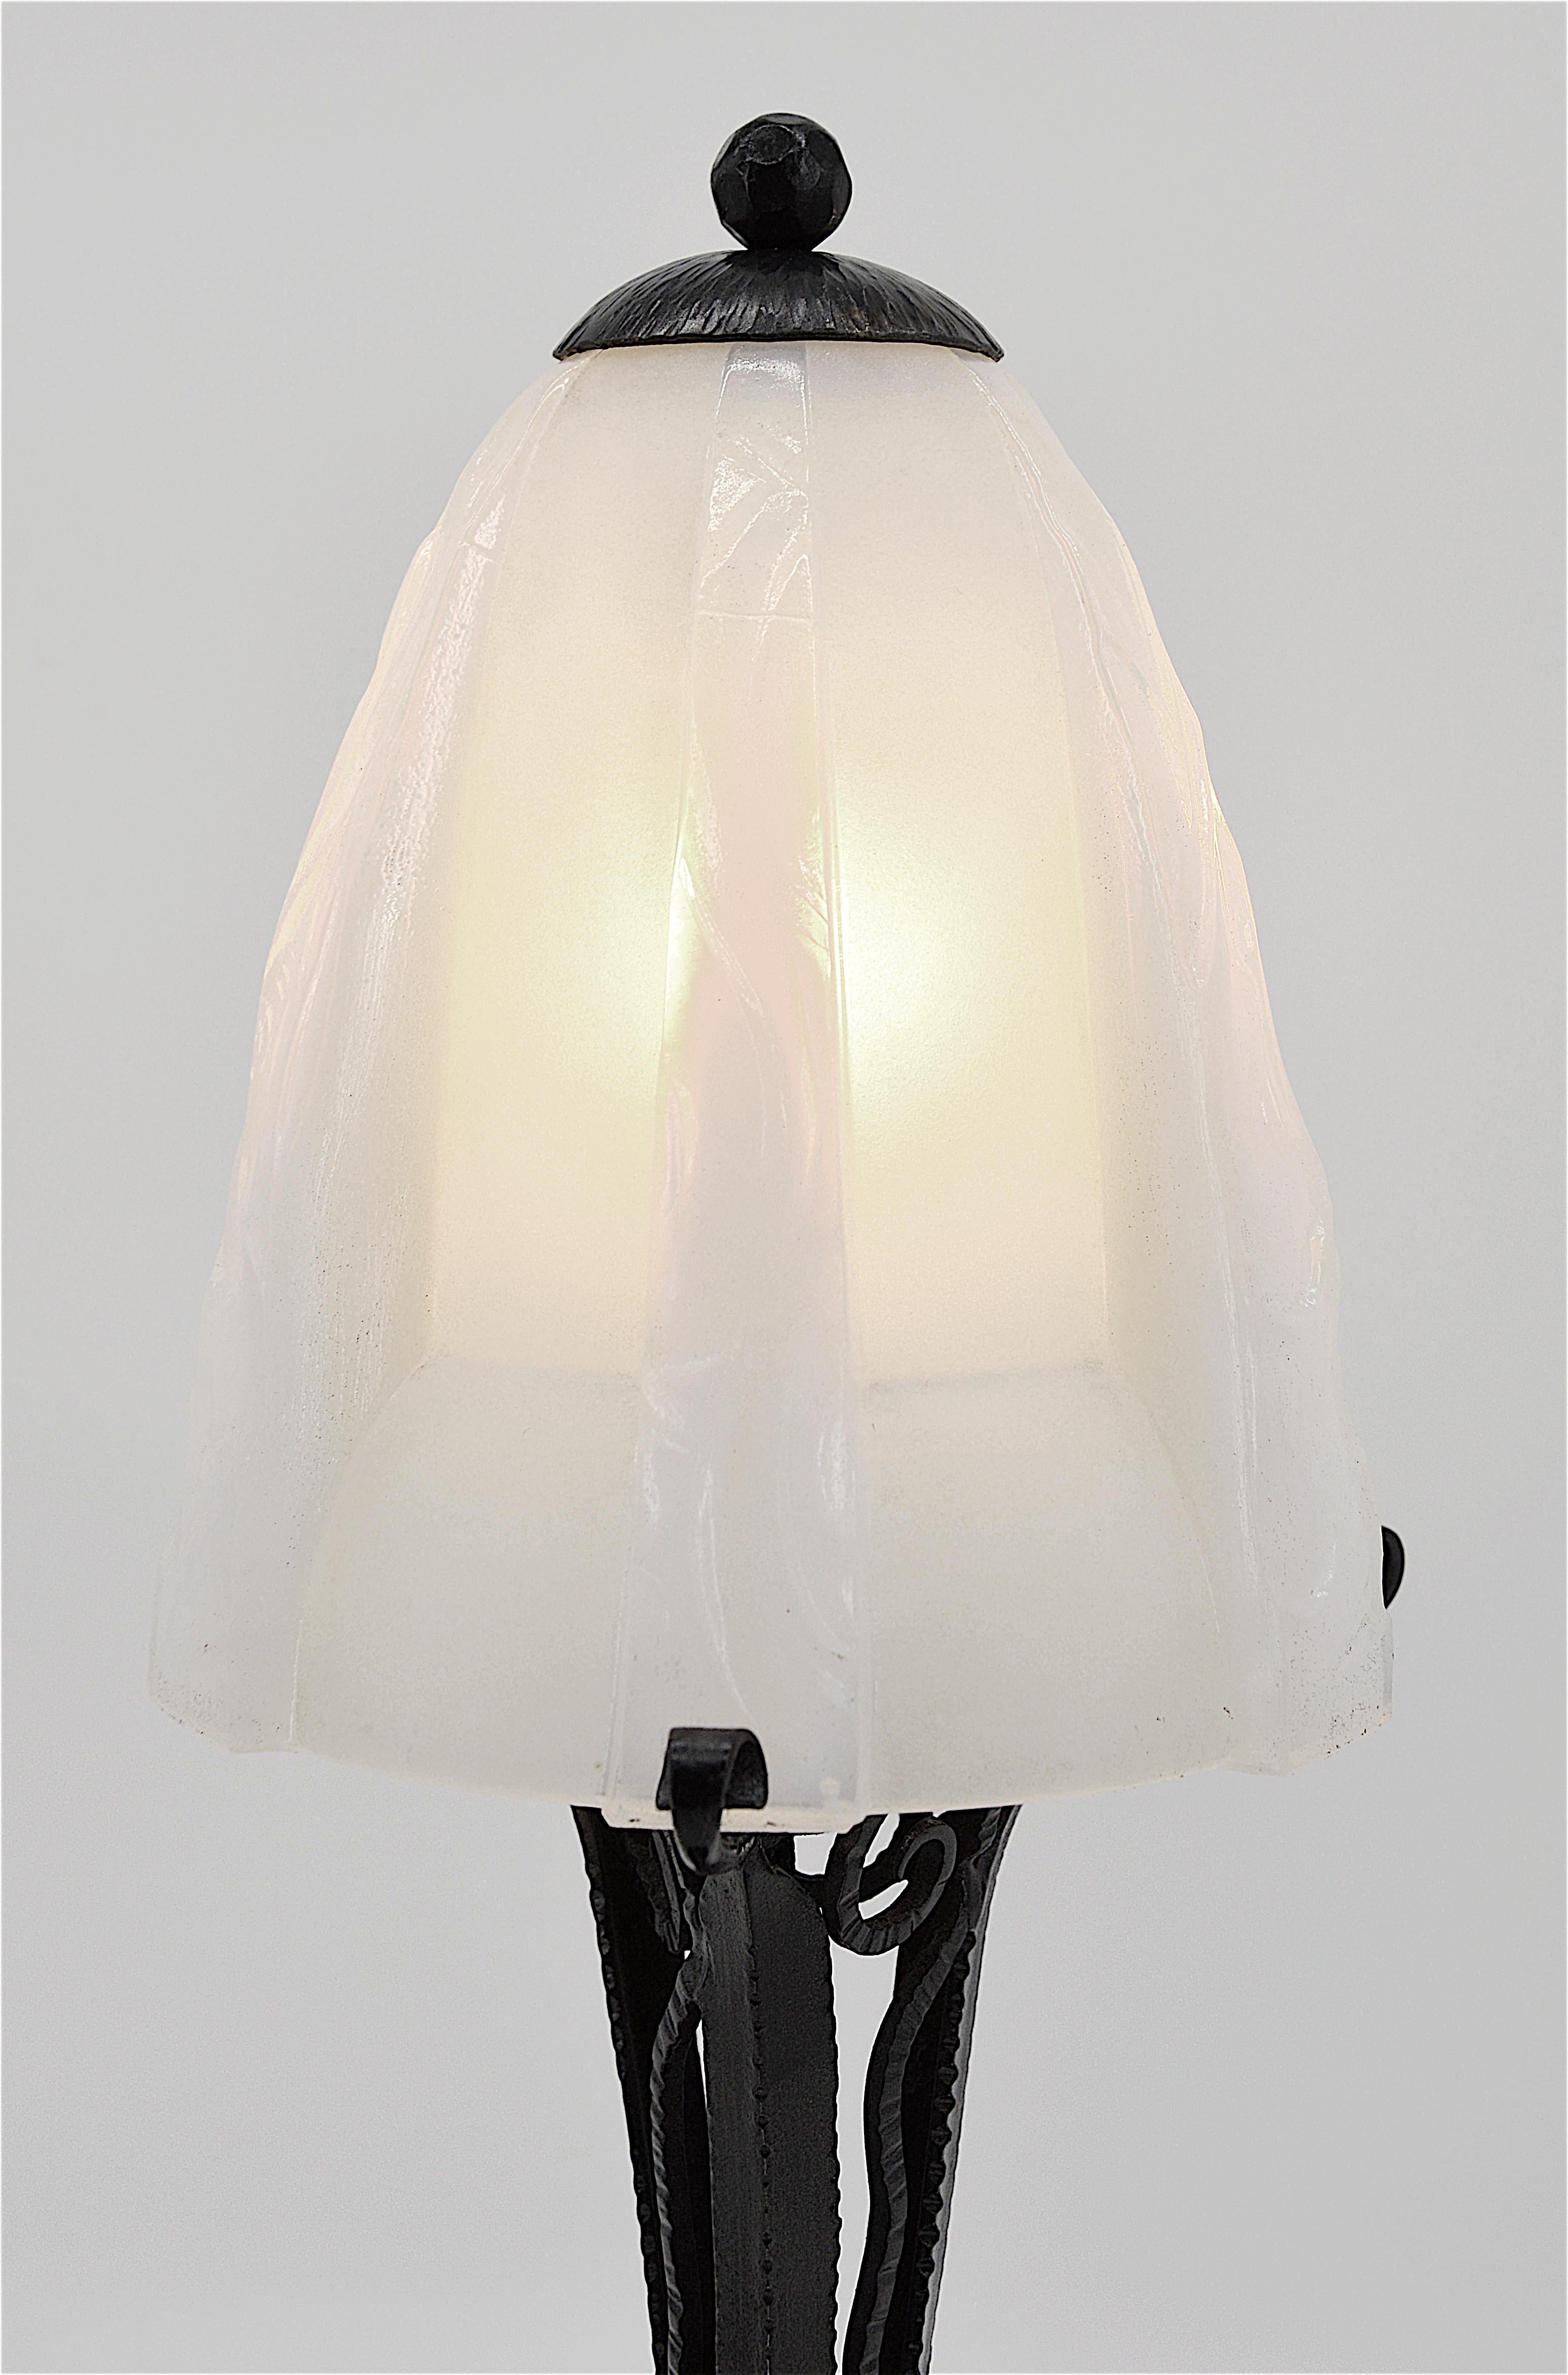 Jean Gauthier French Art Deco Opalescent Table Lamp, 1930s For Sale 3